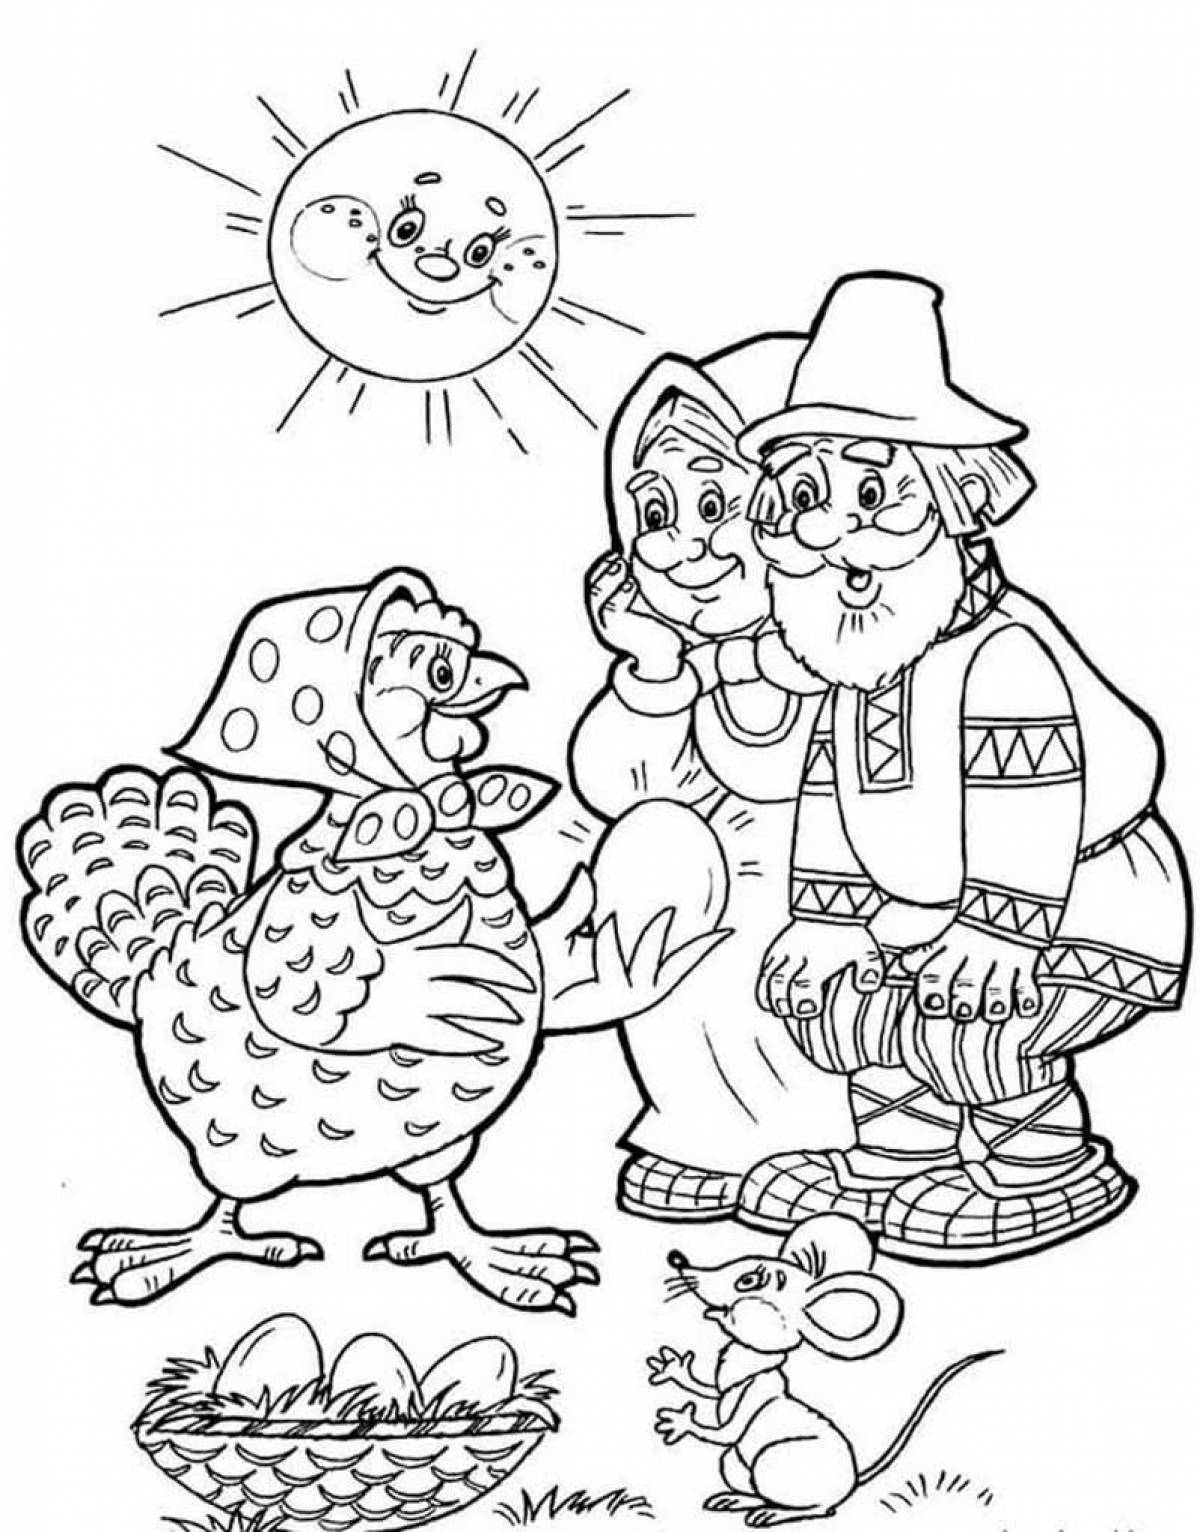 Coloring book charming Russian folk tales